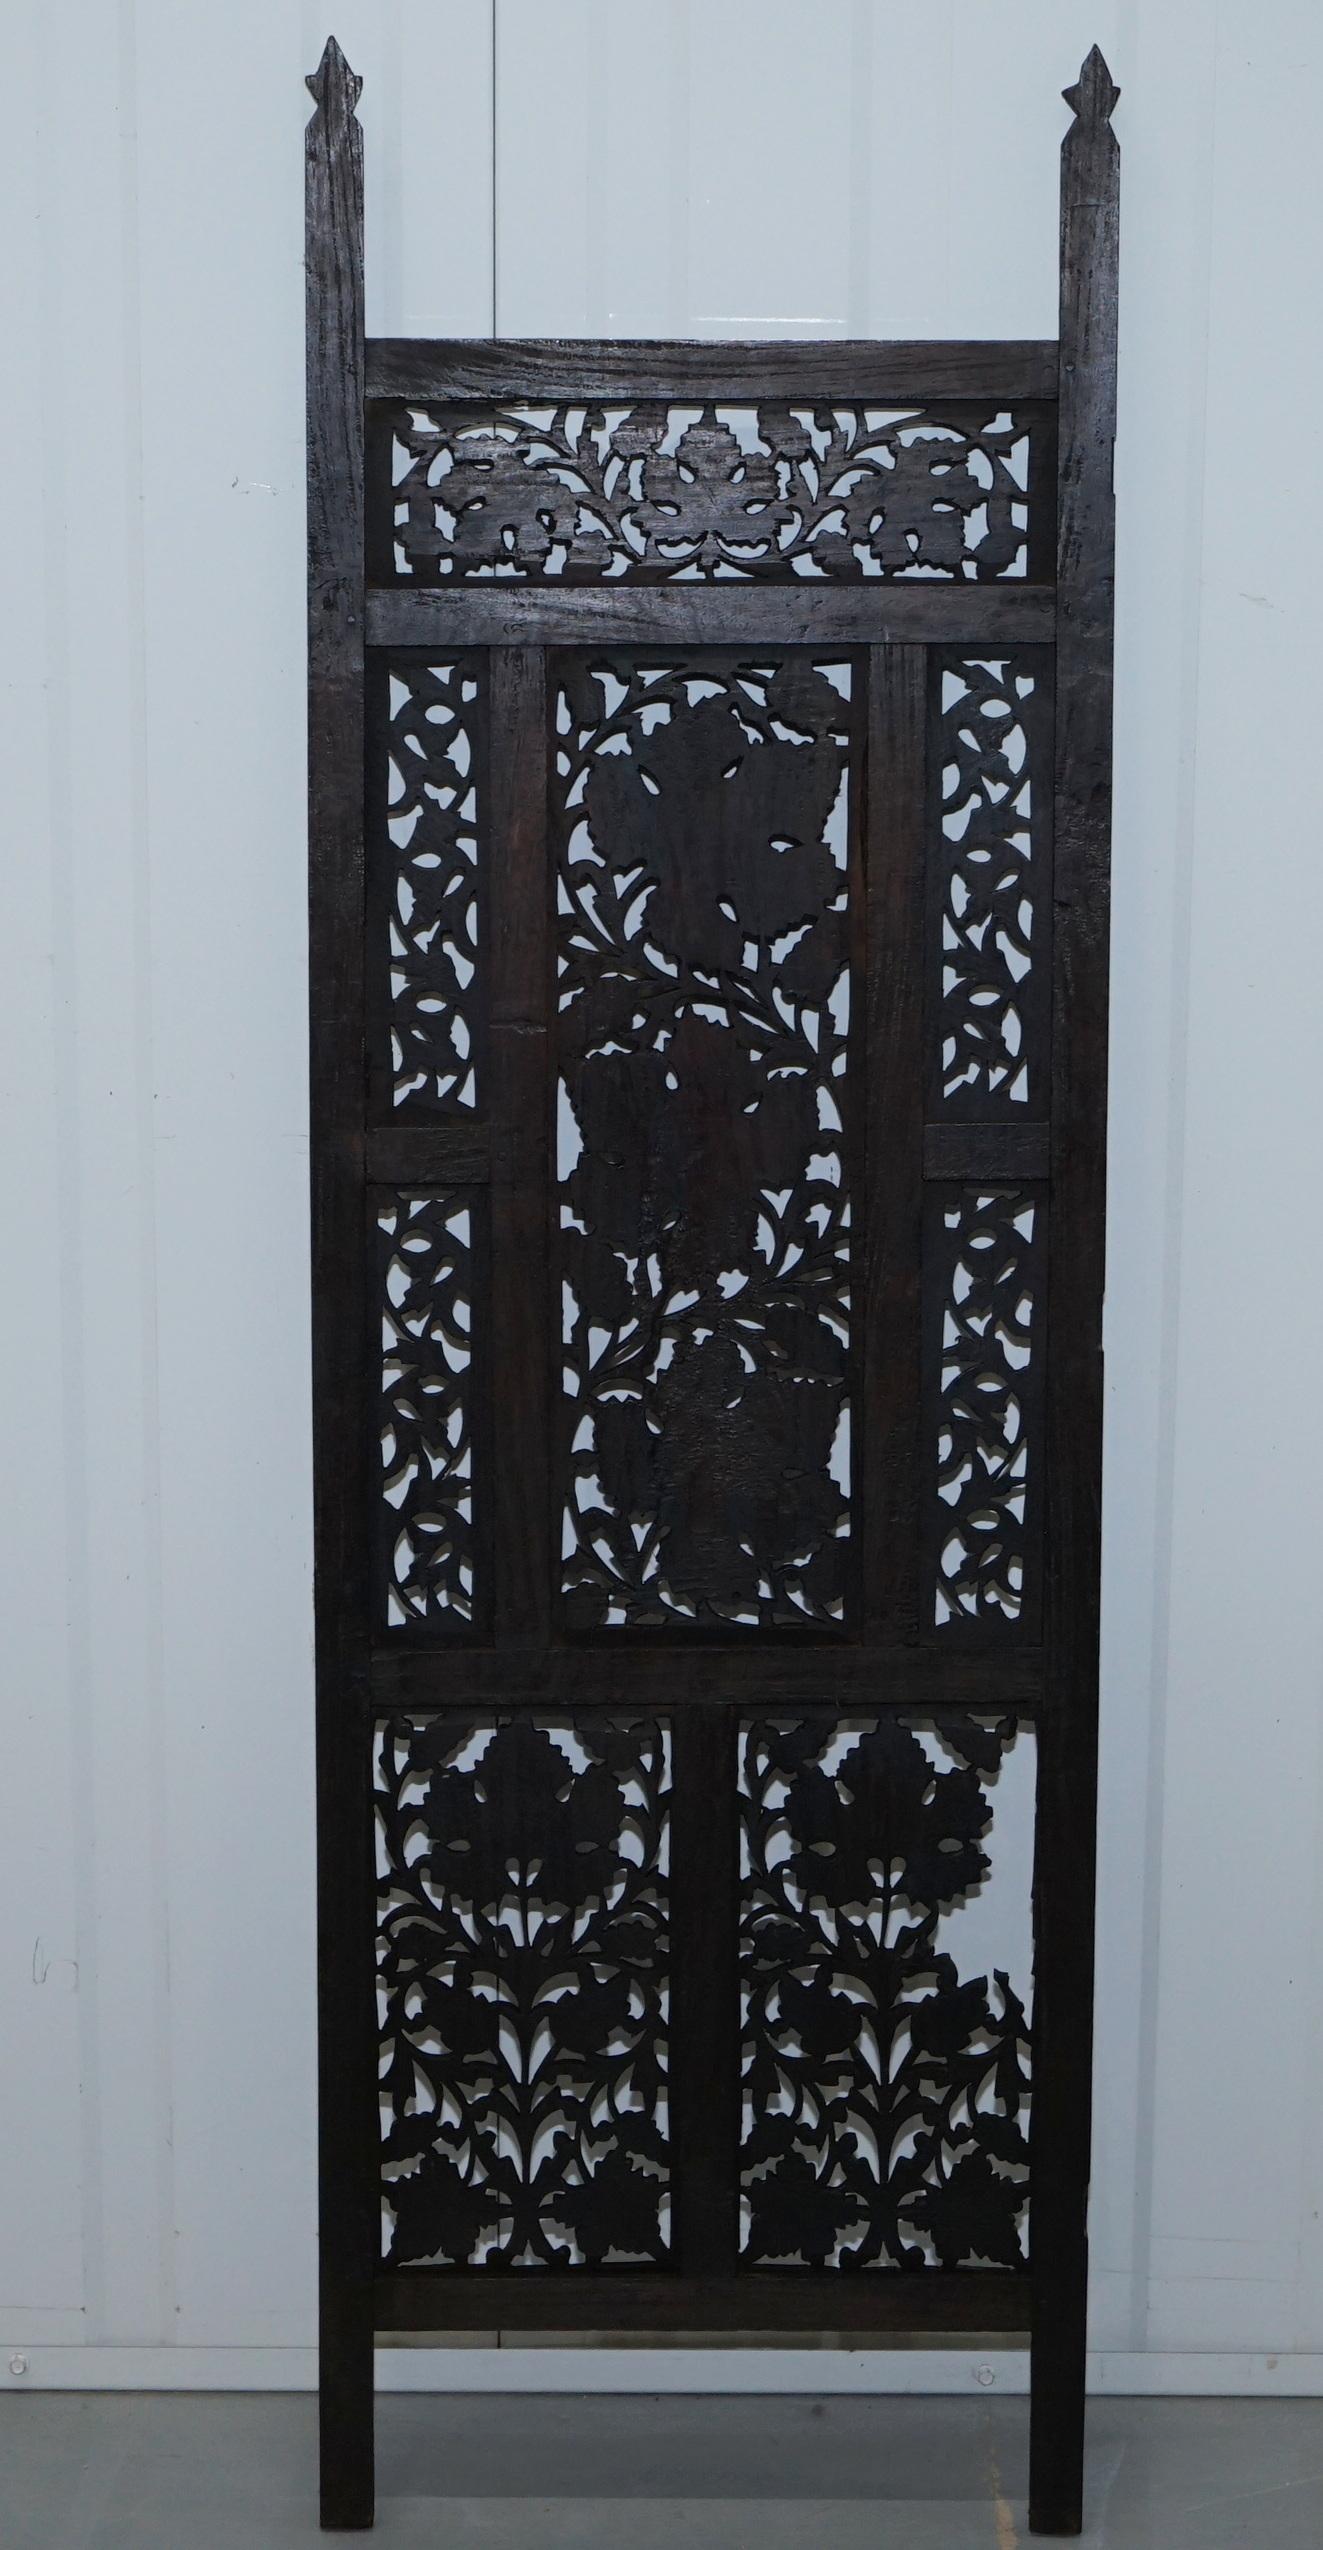 Rare Chinese Fretwork Carved Wall Panels Depicting Leaves Solid Teak Art Wood 13